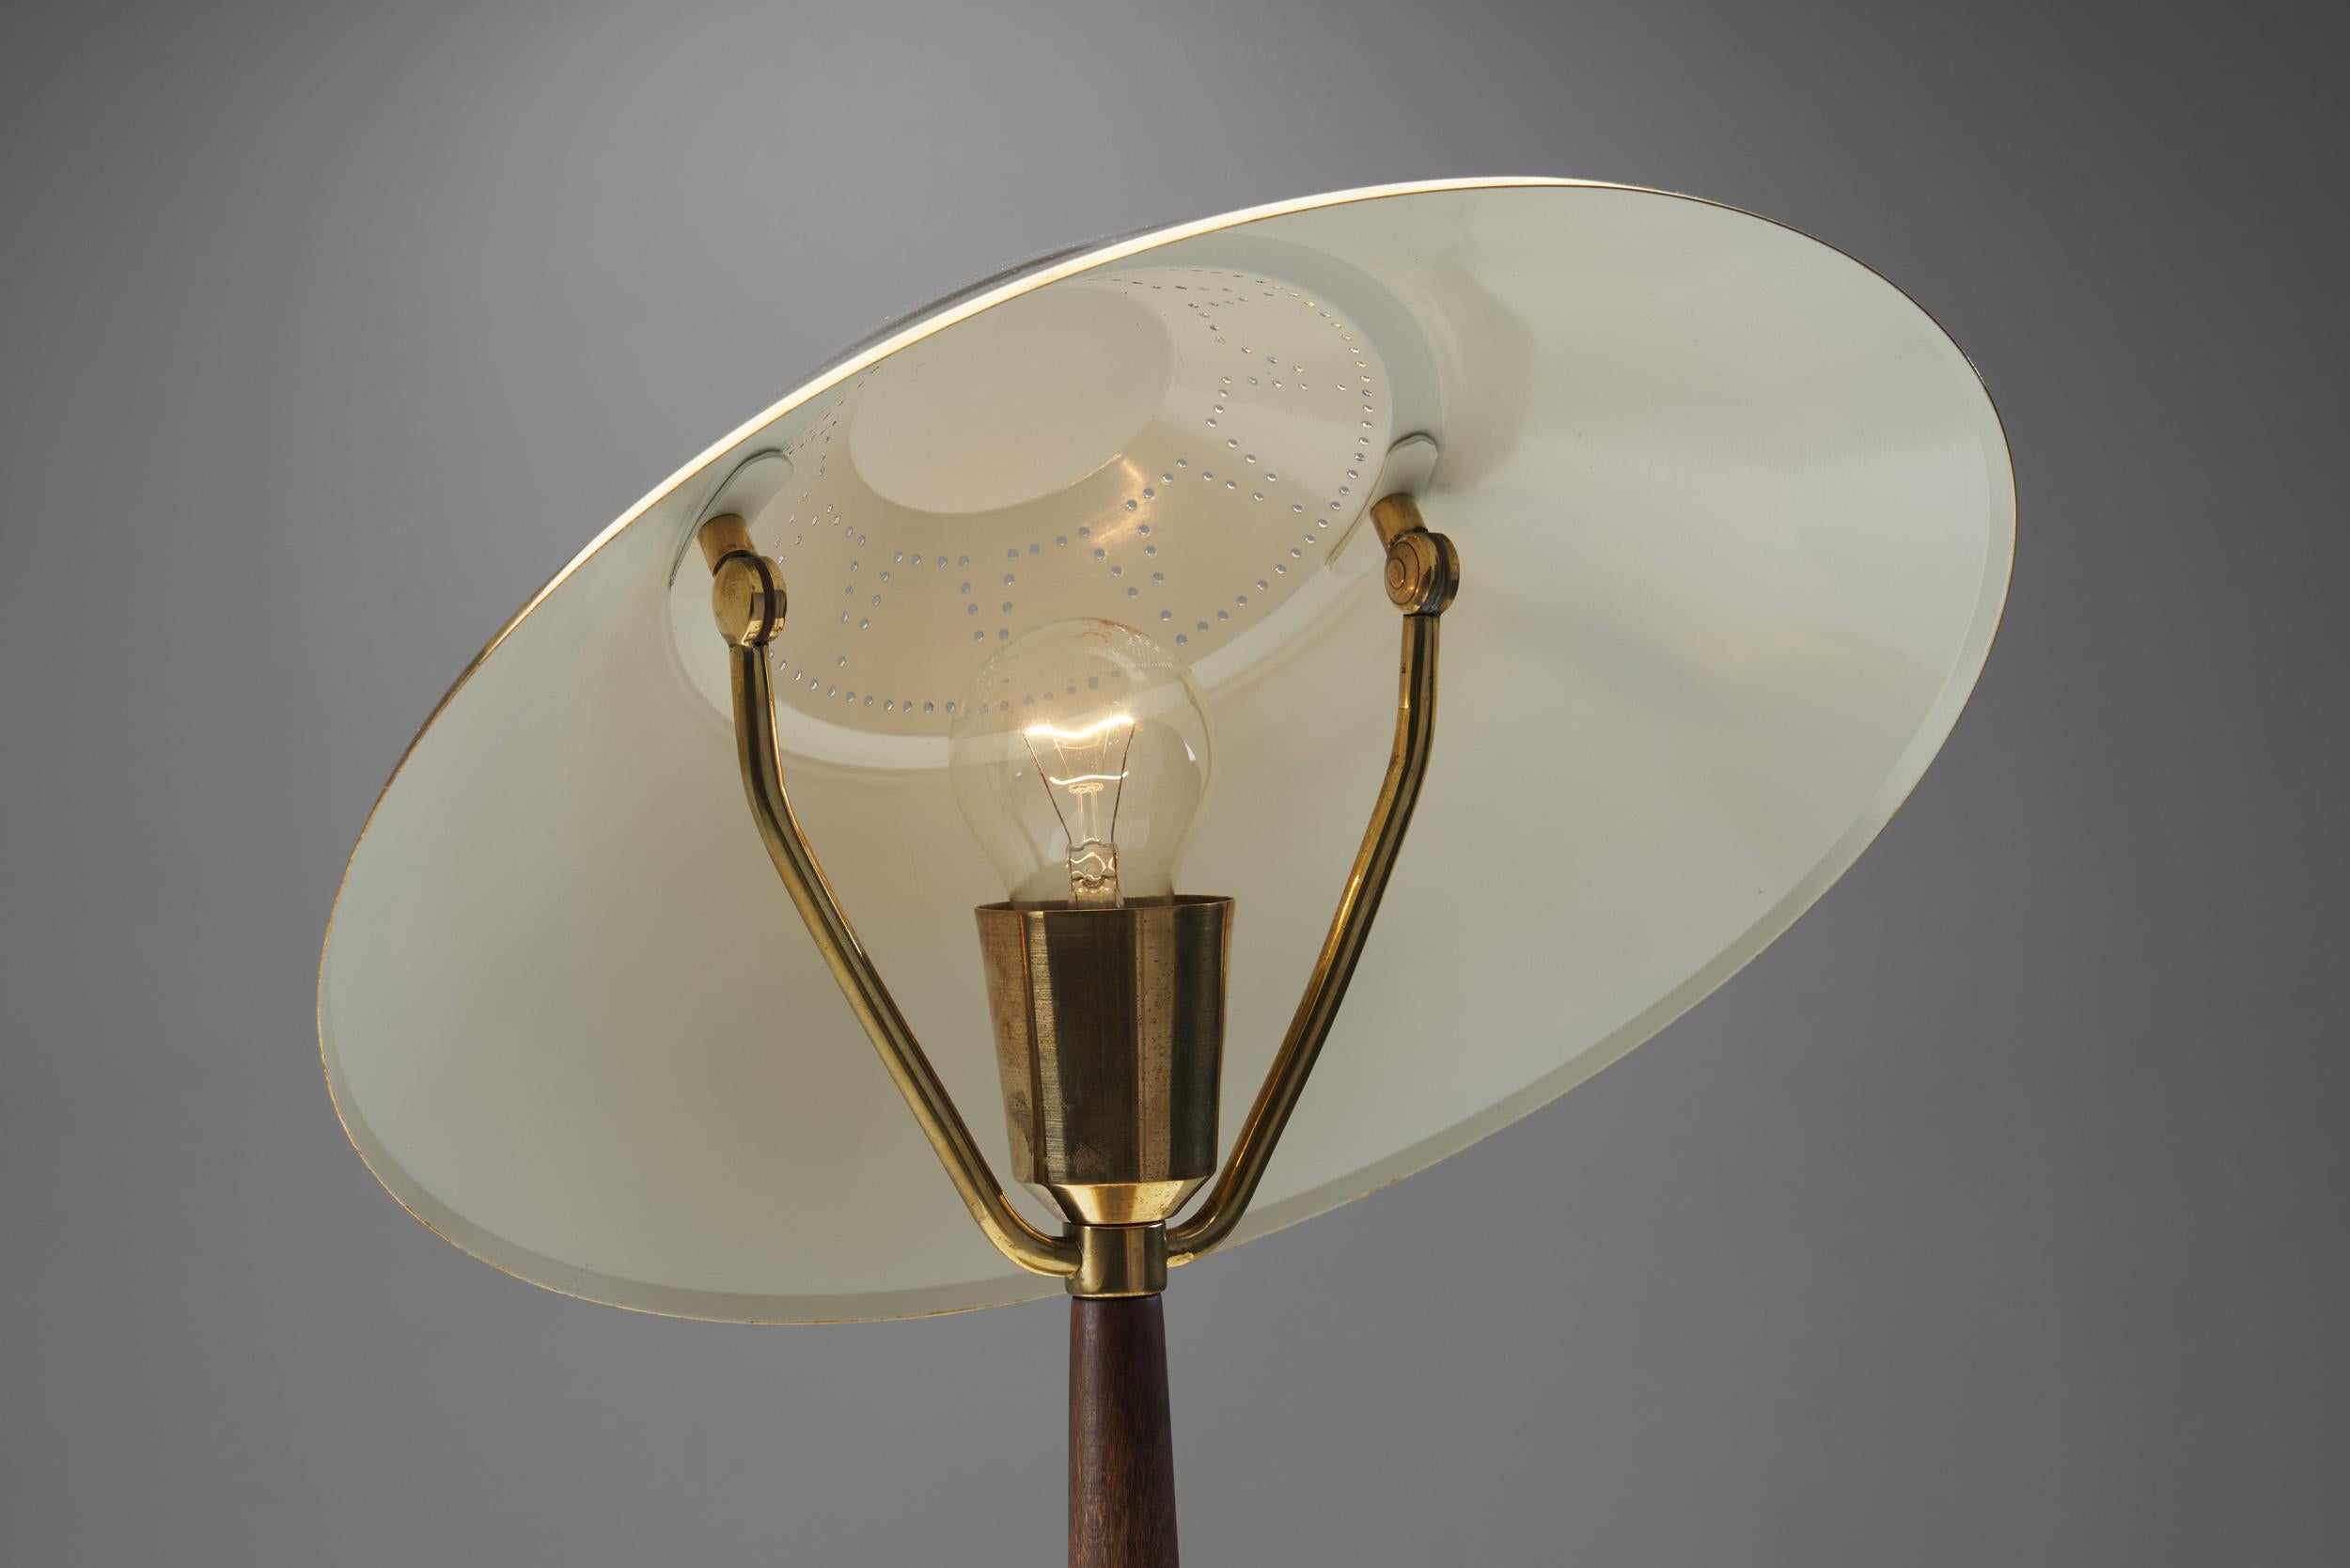 AB E. Hansson & Co. Brass Table Lamp with Adjustable Shade, Sweden 1950s For Sale 4